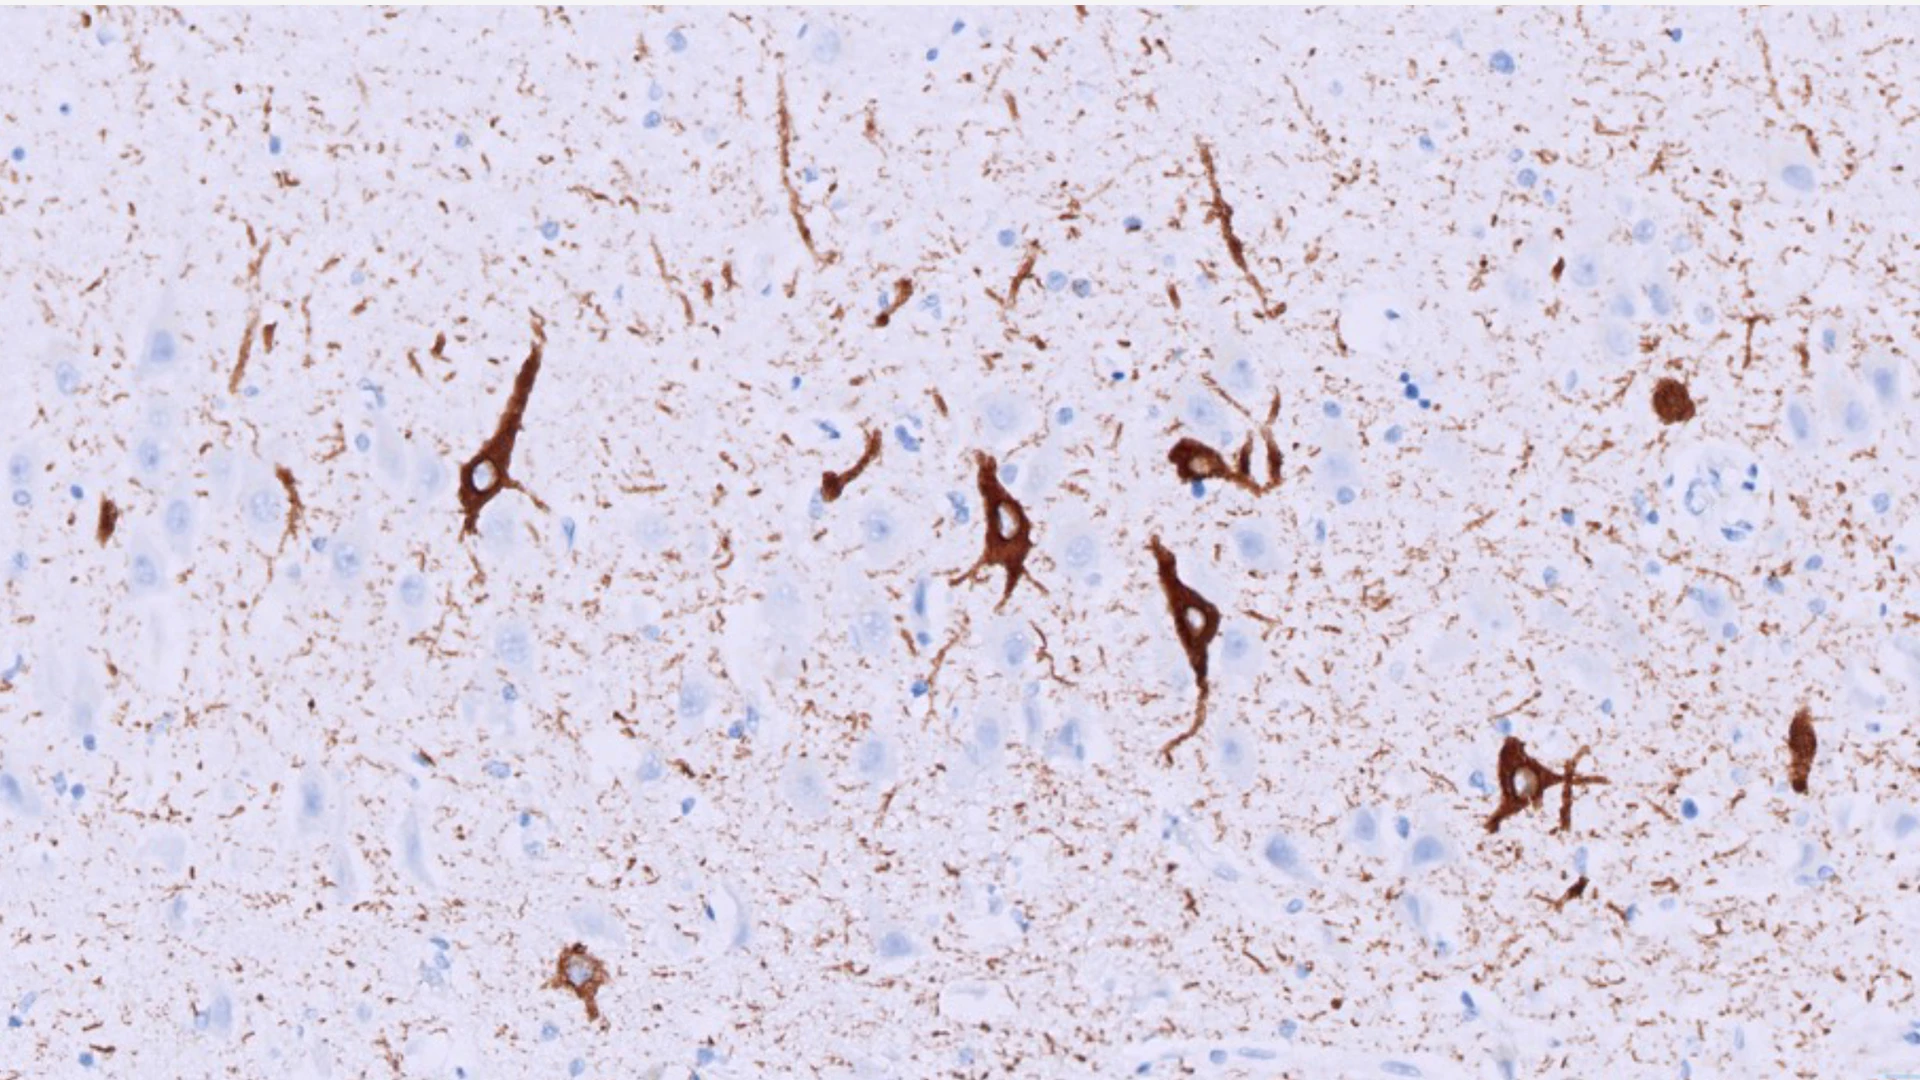 Figure 2: Microscopic image of neurons with tangles (stained in brown) in a patient with primary age-related tauopathy (PART). John Crary, MD, PhD, discovered that these patients who lack amyloid plaques are often misdiagnosed with early Alzheimer’s disease. Brain banks are critical for discovering what causes memory impairment so that precision therapeutics can be developed.